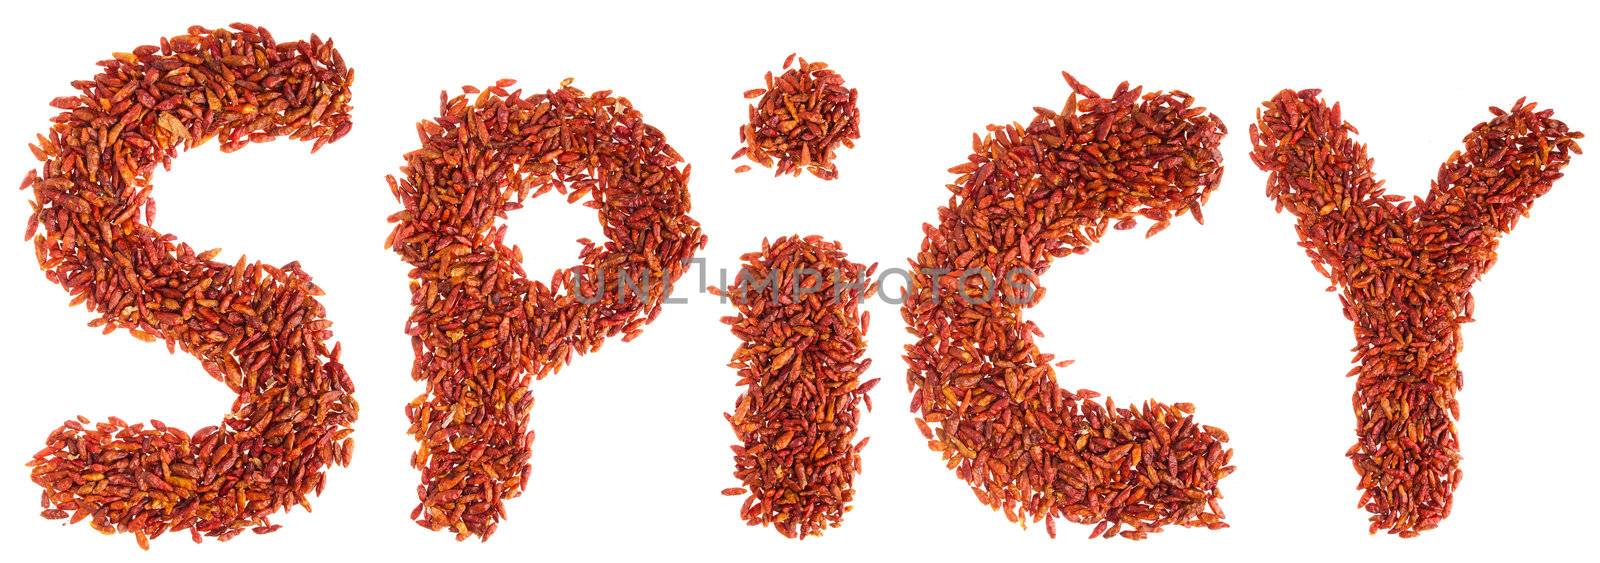 spicy written with piri piri chilli peppers (isolated on white background)